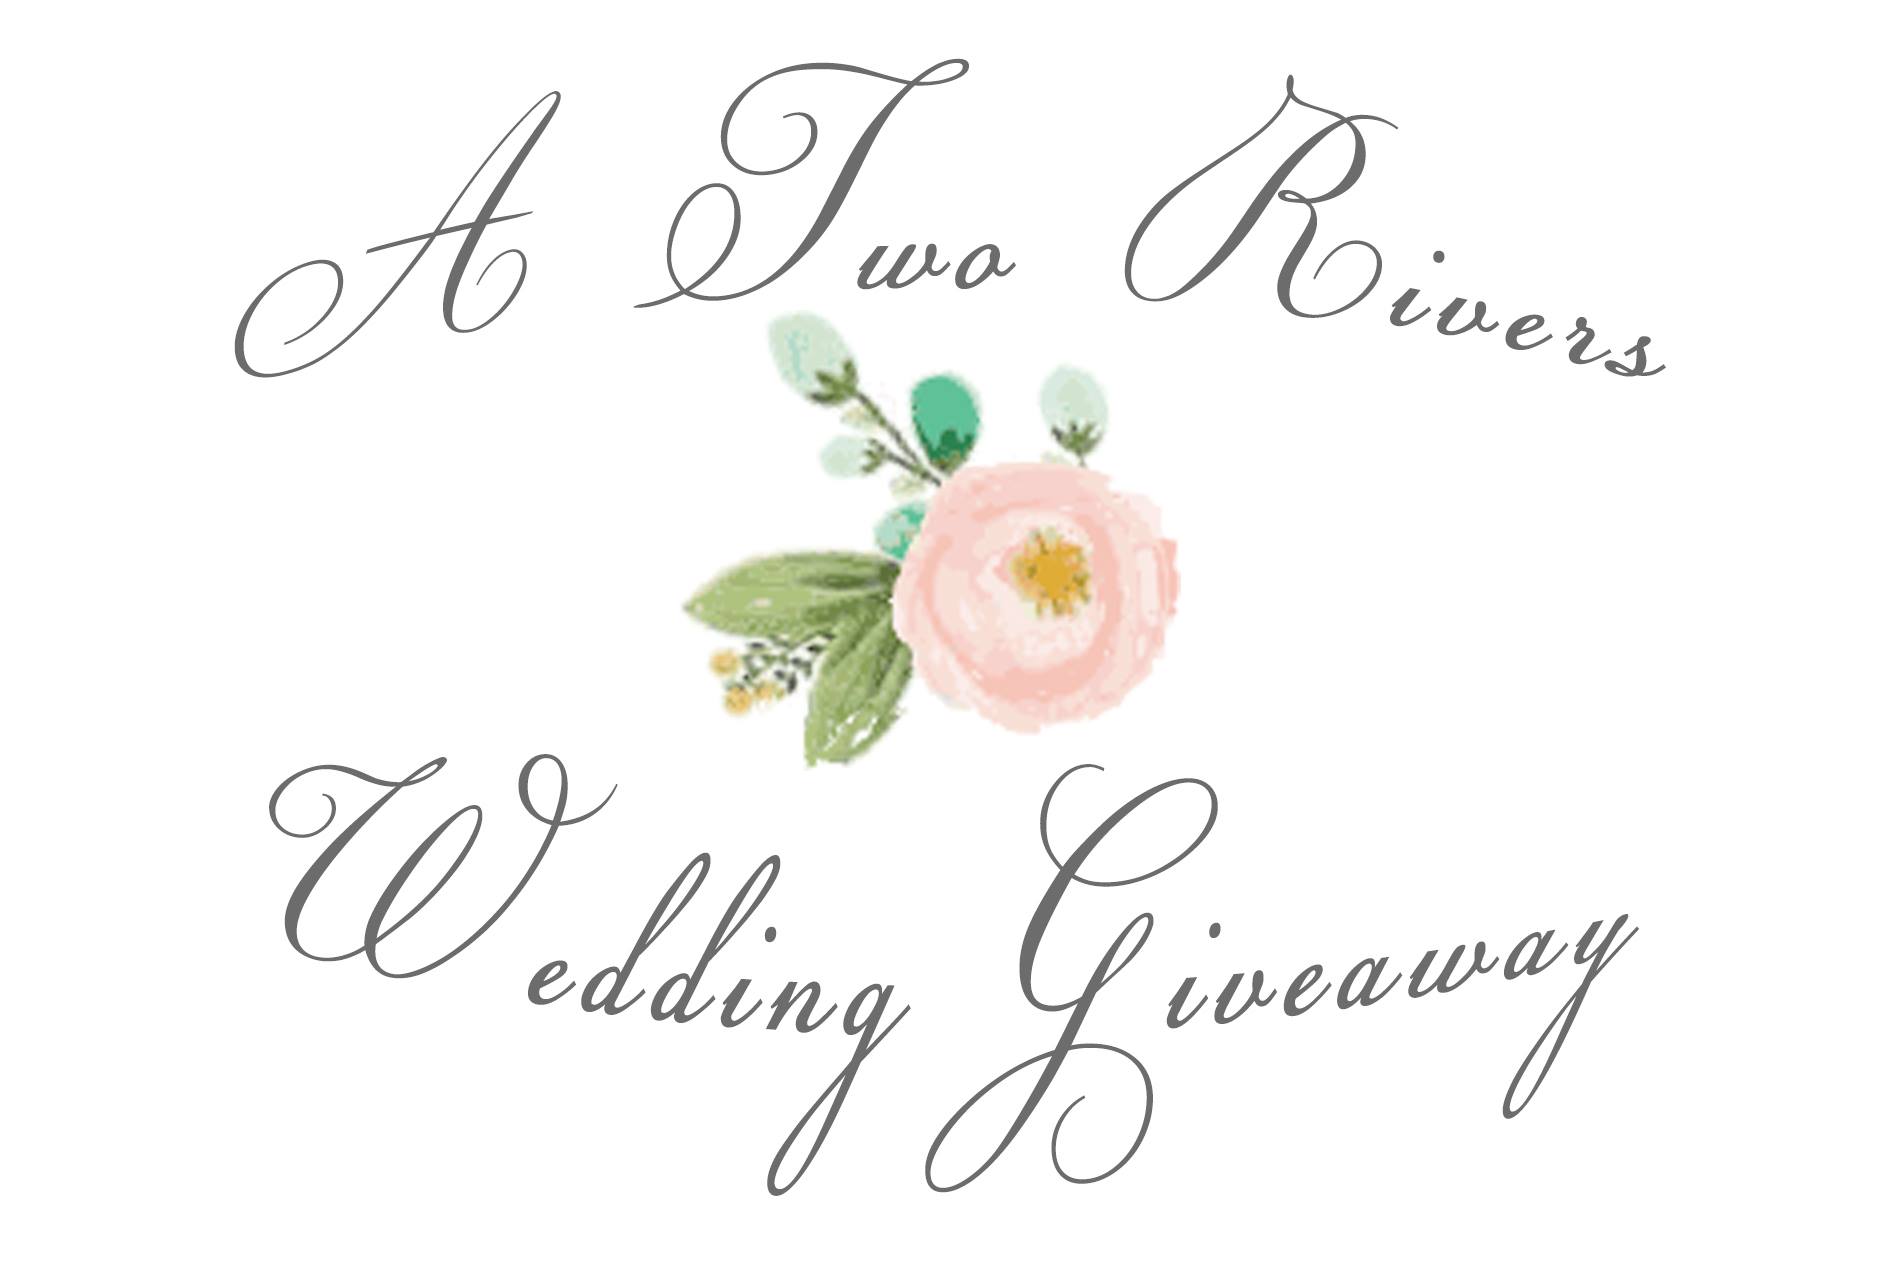 A Two Rivers Wedding Giveaway